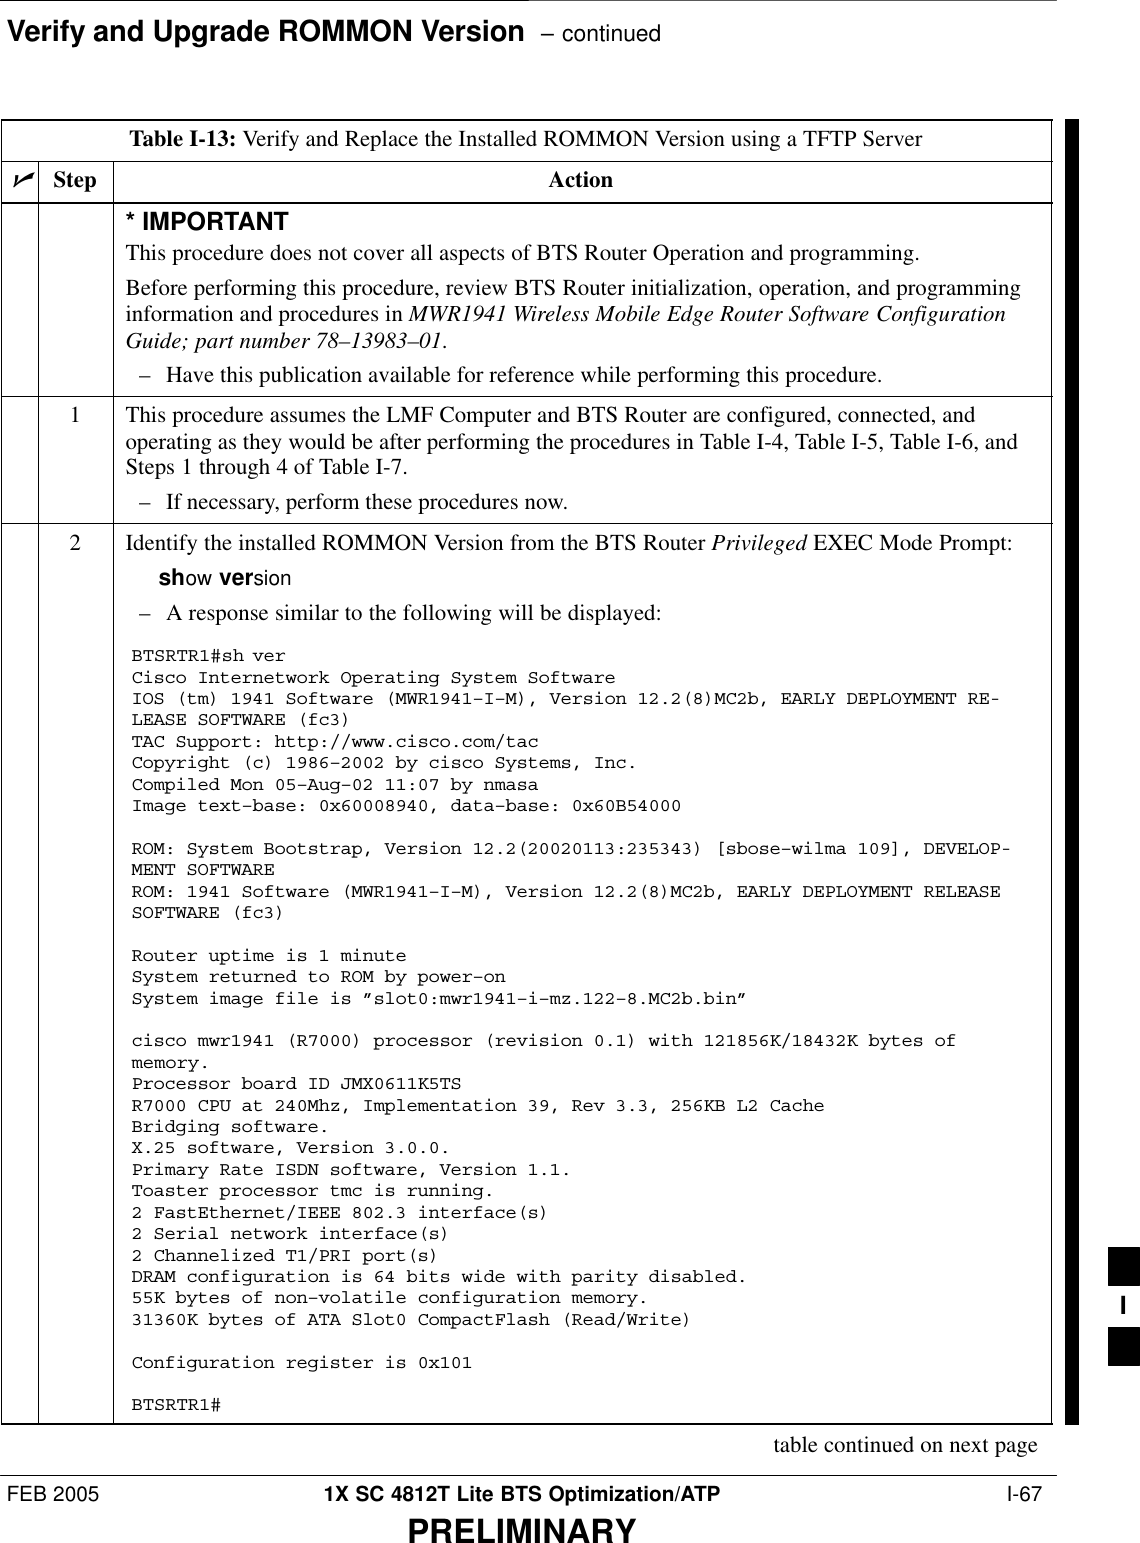 Verify and Upgrade ROMMON Version  – continuedFEB 2005 1X SC 4812T Lite BTS Optimization/ATP  I-67PRELIMINARYTable I-13: Verify and Replace the Installed ROMMON Version using a TFTP ServernStep Action* IMPORTANTThis procedure does not cover all aspects of BTS Router Operation and programming.Before performing this procedure, review BTS Router initialization, operation, and programminginformation and procedures in MWR1941 Wireless Mobile Edge Router Software ConfigurationGuide; part number 78–13983–01.– Have this publication available for reference while performing this procedure.1This procedure assumes the LMF Computer and BTS Router are configured, connected, andoperating as they would be after performing the procedures in Table I-4, Table I-5, Table I-6, andSteps 1 through 4 of Table I-7.– If necessary, perform these procedures now.2Identify the installed ROMMON Version from the BTS Router Privileged EXEC Mode Prompt:show version– A response similar to the following will be displayed:BTSRTR1#sh verCisco Internetwork Operating System Software IOS (tm) 1941 Software (MWR1941–I–M), Version 12.2(8)MC2b, EARLY DEPLOYMENT RE-LEASE SOFTWARE (fc3)TAC Support: http://www.cisco.com/tacCopyright (c) 1986–2002 by cisco Systems, Inc.Compiled Mon 05–Aug–02 11:07 by nmasaImage text–base: 0x60008940, data–base: 0x60B54000ROM: System Bootstrap, Version 12.2(20020113:235343) [sbose–wilma 109], DEVELOP-MENT SOFTWAREROM: 1941 Software (MWR1941–I–M), Version 12.2(8)MC2b, EARLY DEPLOYMENT RELEASESOFTWARE (fc3)Router uptime is 1 minuteSystem returned to ROM by power–onSystem image file is ”slot0:mwr1941–i–mz.122–8.MC2b.bin”cisco mwr1941 (R7000) processor (revision 0.1) with 121856K/18432K bytes ofmemory.Processor board ID JMX0611K5TSR7000 CPU at 240Mhz, Implementation 39, Rev 3.3, 256KB L2 CacheBridging software.X.25 software, Version 3.0.0.Primary Rate ISDN software, Version 1.1.Toaster processor tmc is running.2 FastEthernet/IEEE 802.3 interface(s)2 Serial network interface(s)2 Channelized T1/PRI port(s)DRAM configuration is 64 bits wide with parity disabled.55K bytes of non–volatile configuration memory.31360K bytes of ATA Slot0 CompactFlash (Read/Write)Configuration register is 0x101BTSRTR1#table continued on next pageI